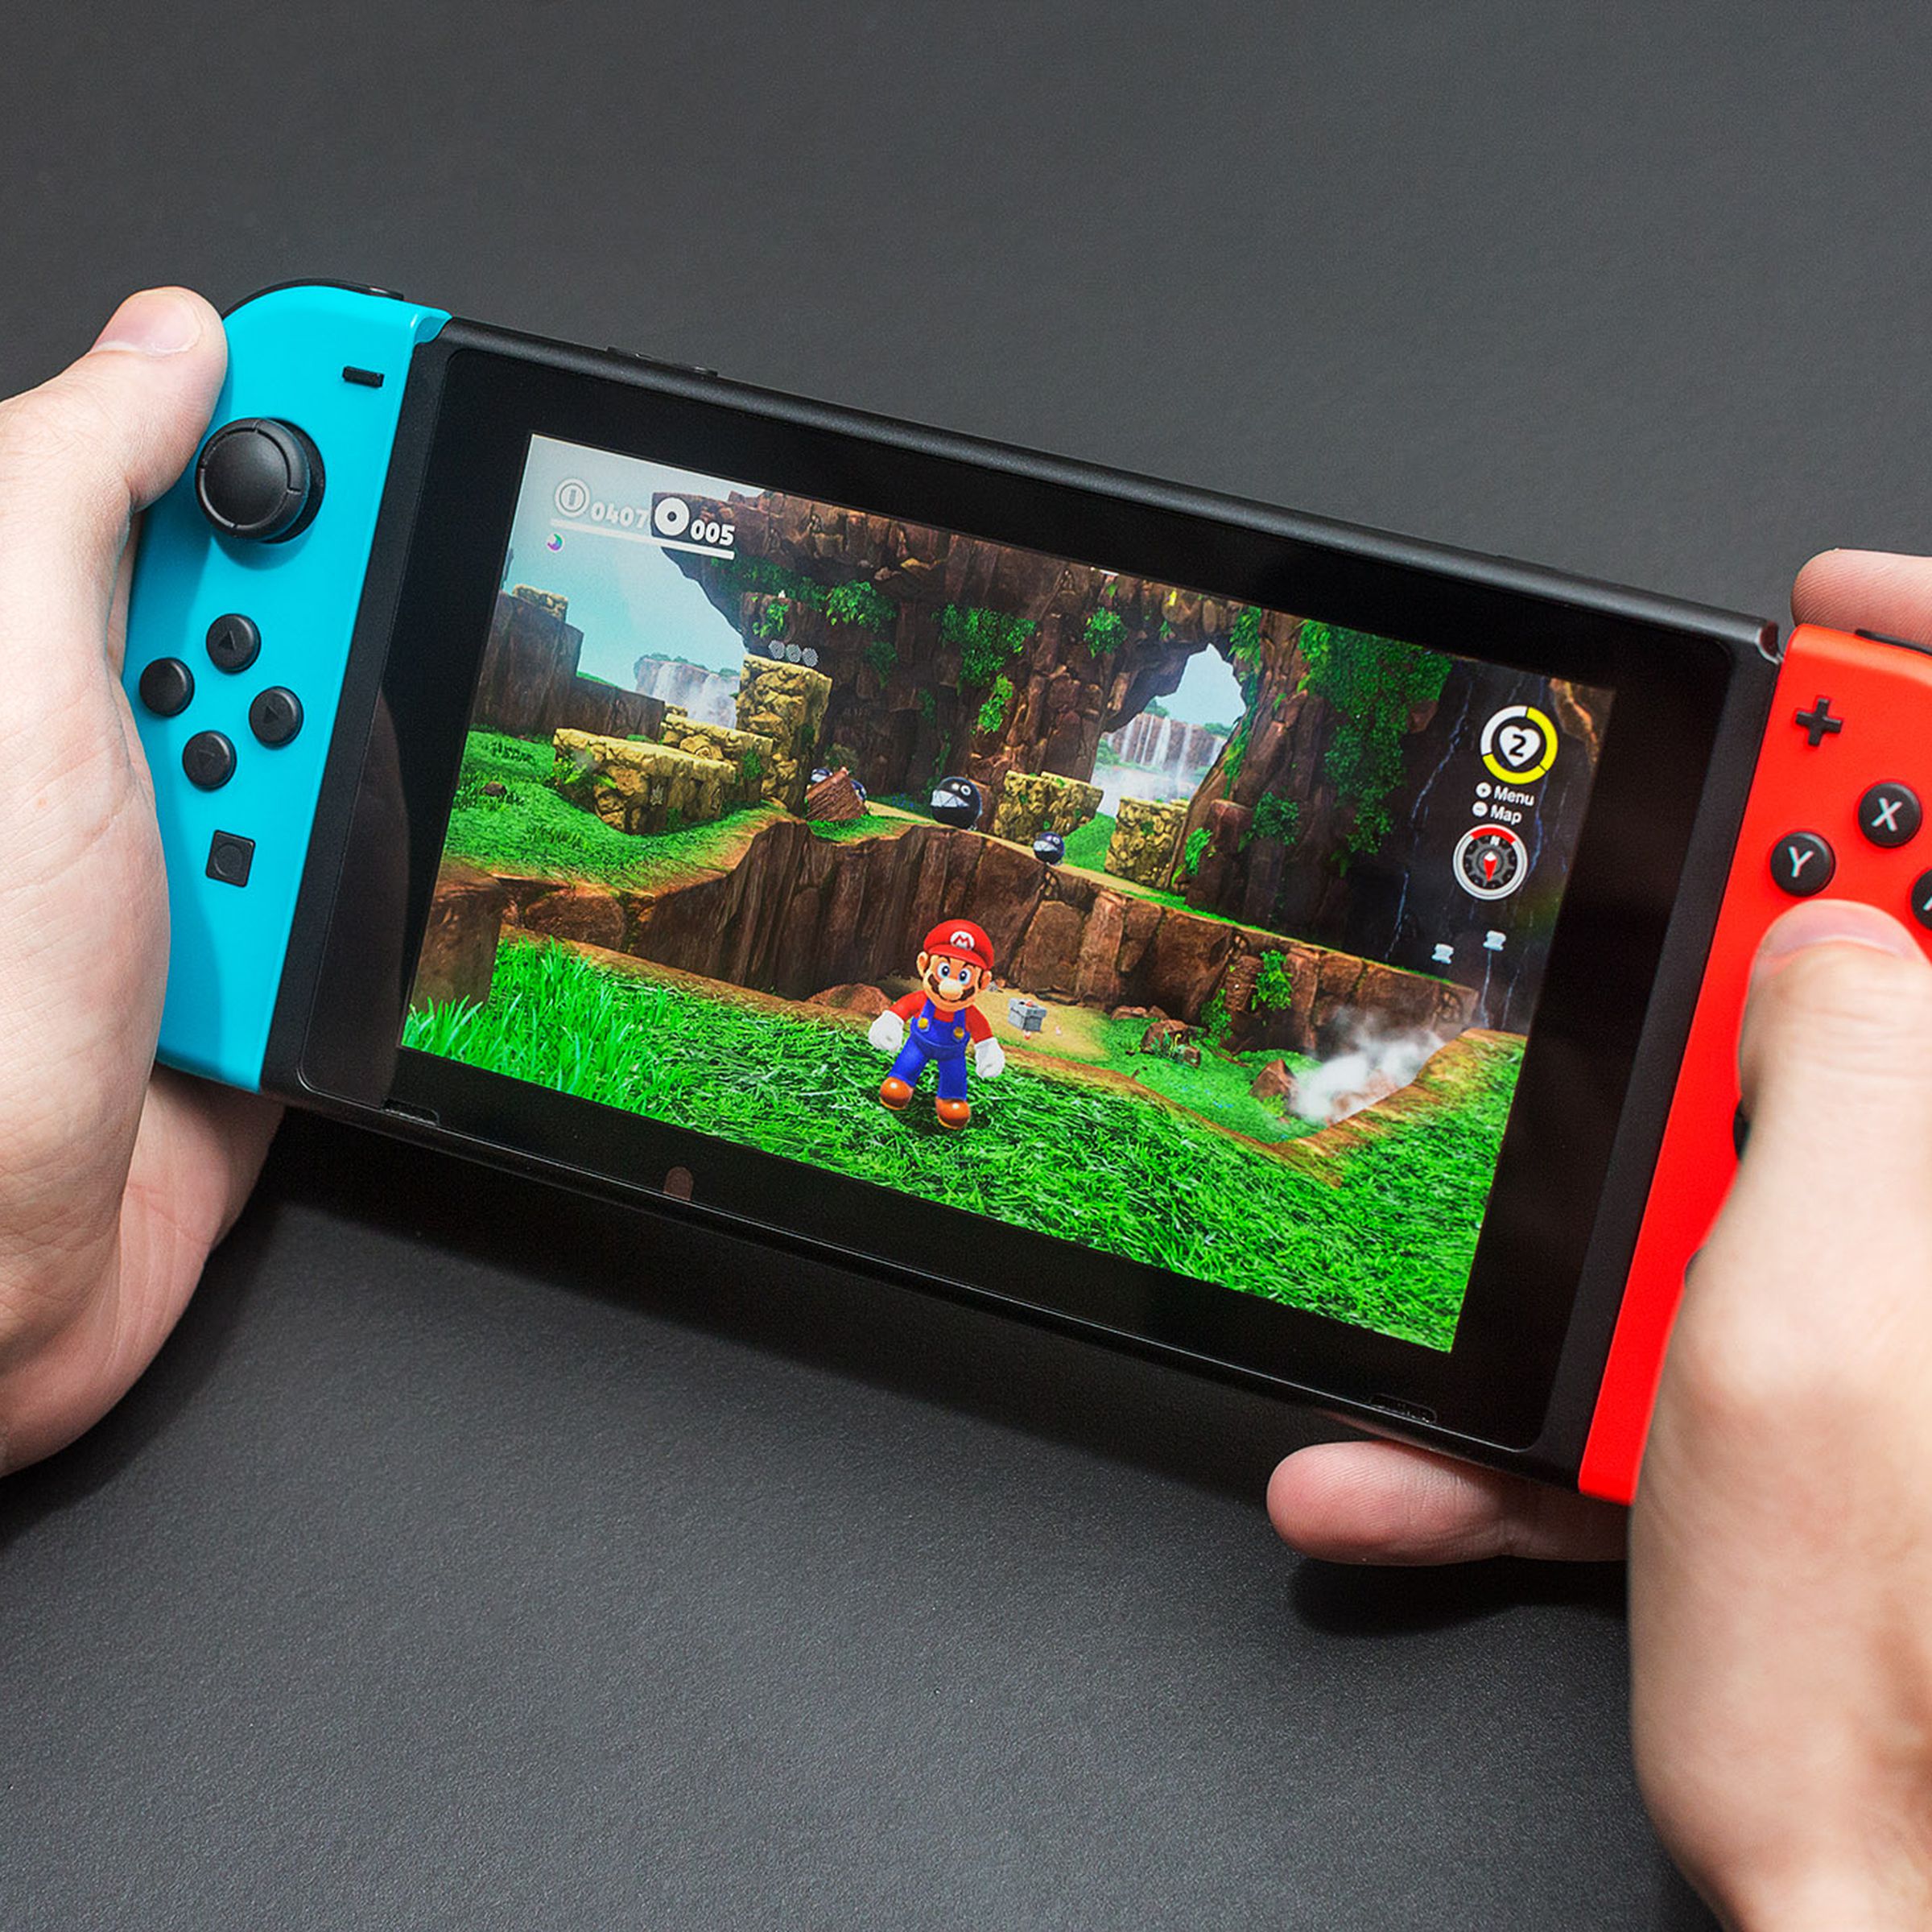 A pair of hands holding a Nintendo Switch console with neon red and blue Joy-Con controllers, playing Super Mario Odyssey in handheld mode.